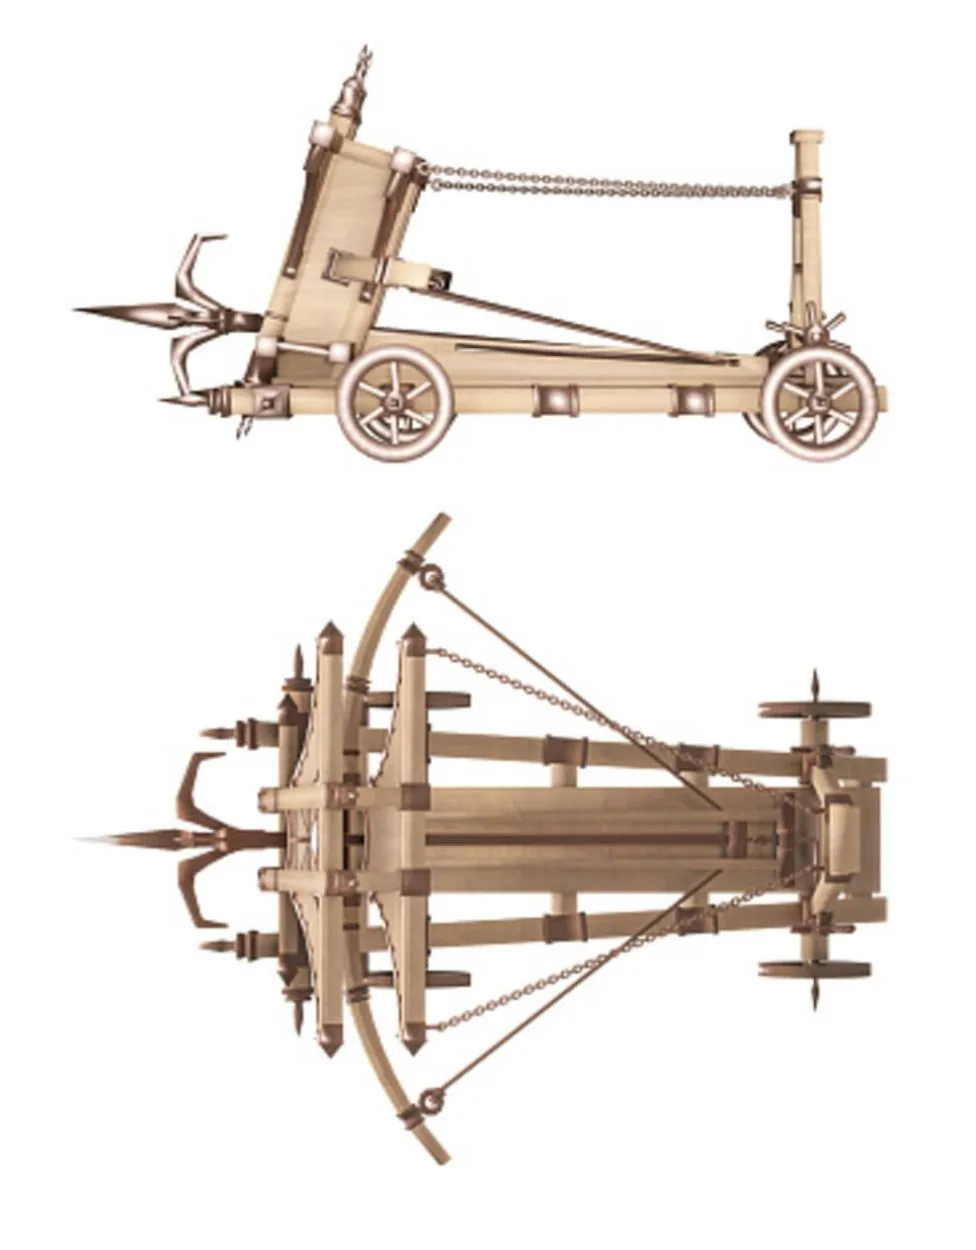 A ballista isolated on a white background giving a top view